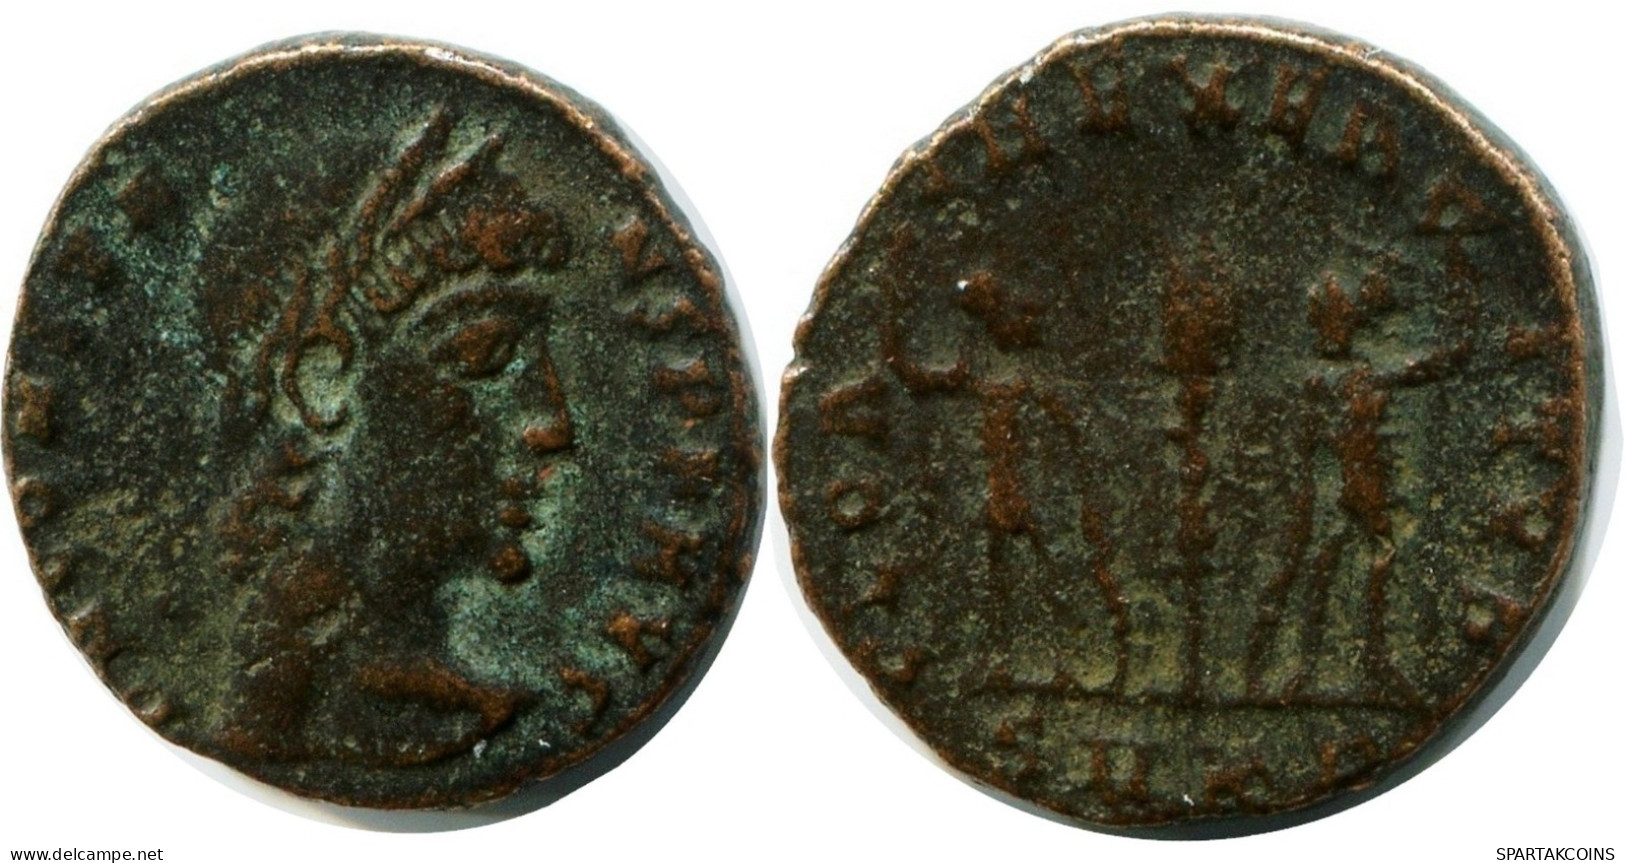 CONSTANS MINTED IN CYZICUS FROM THE ROYAL ONTARIO MUSEUM #ANC11650.14.D.A - El Impero Christiano (307 / 363)